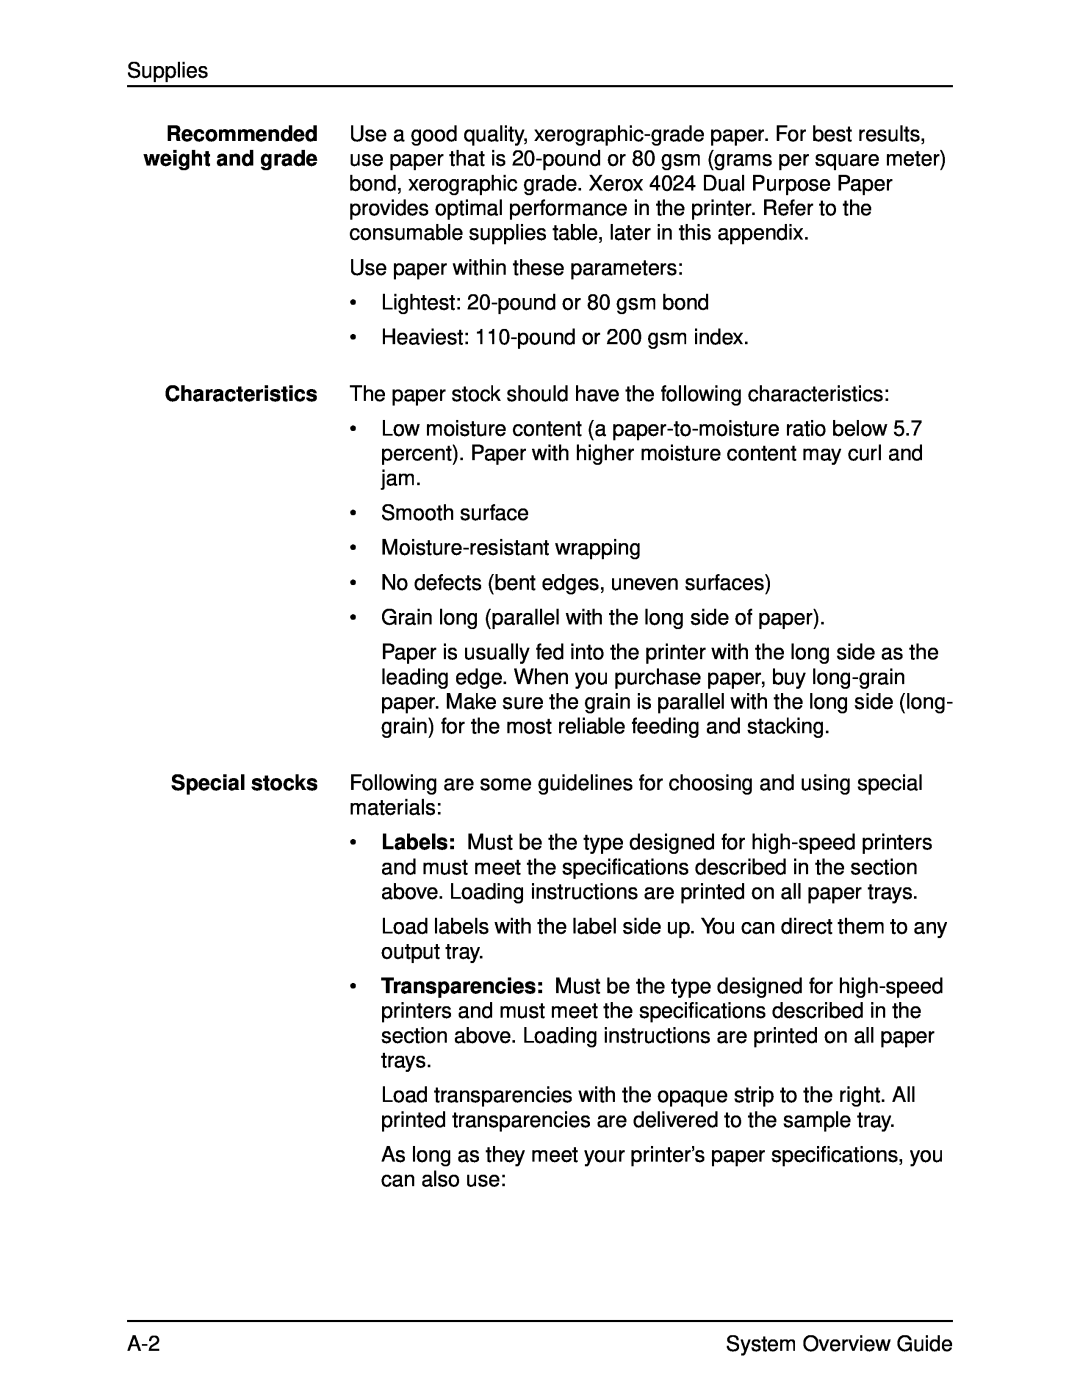 Xerox 4890, IPS, NPS Supplies, Use paper within these parameters, Lightest 20-poundor 80 gsm bond, System Overview Guide 